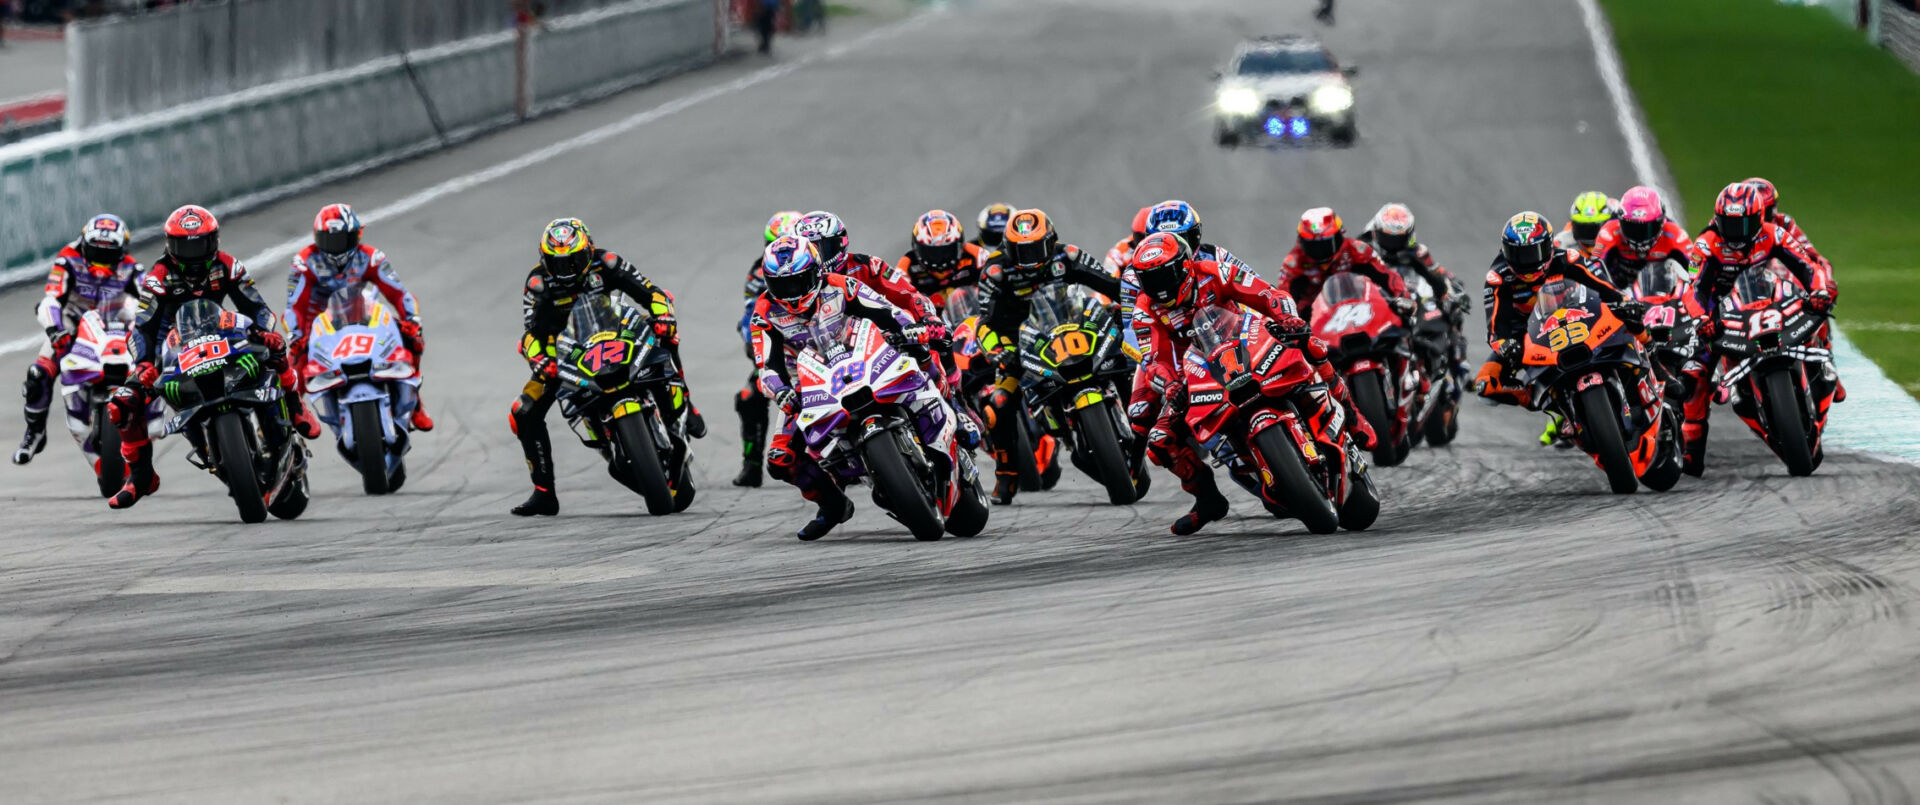 The start of Sunday's MotoGP race at Sepang with Francesco Bagnaia (1) and Jorge Martin (89) fighting for first place heading into Turn One. Photo by Kohei Hirota.